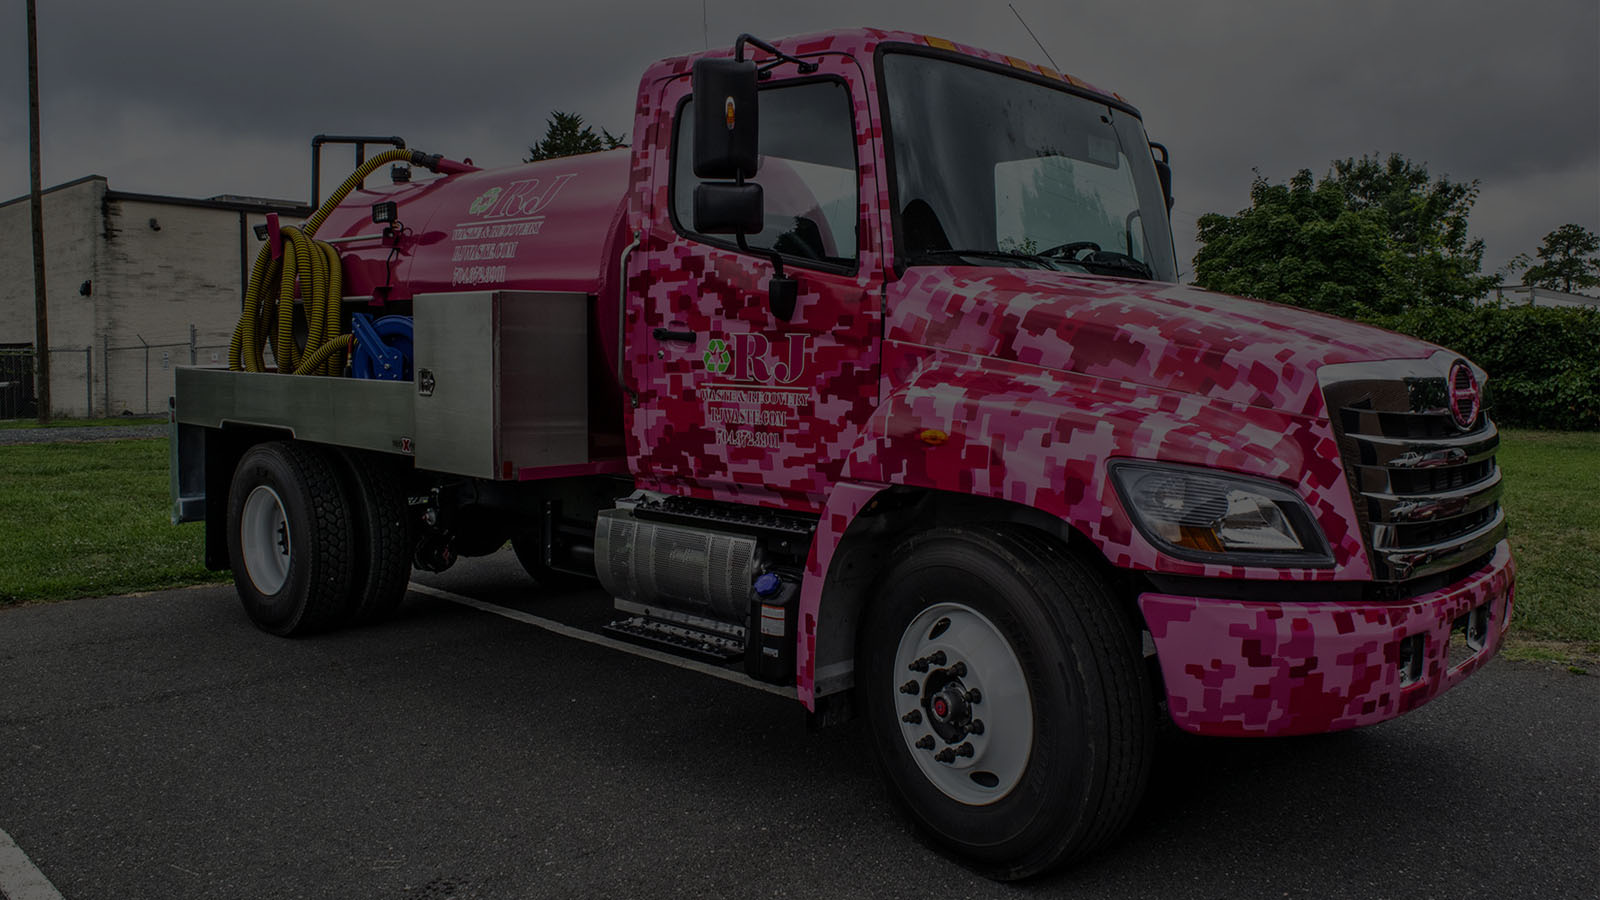 RJ Water Truck Vehicle Wrap, featured image